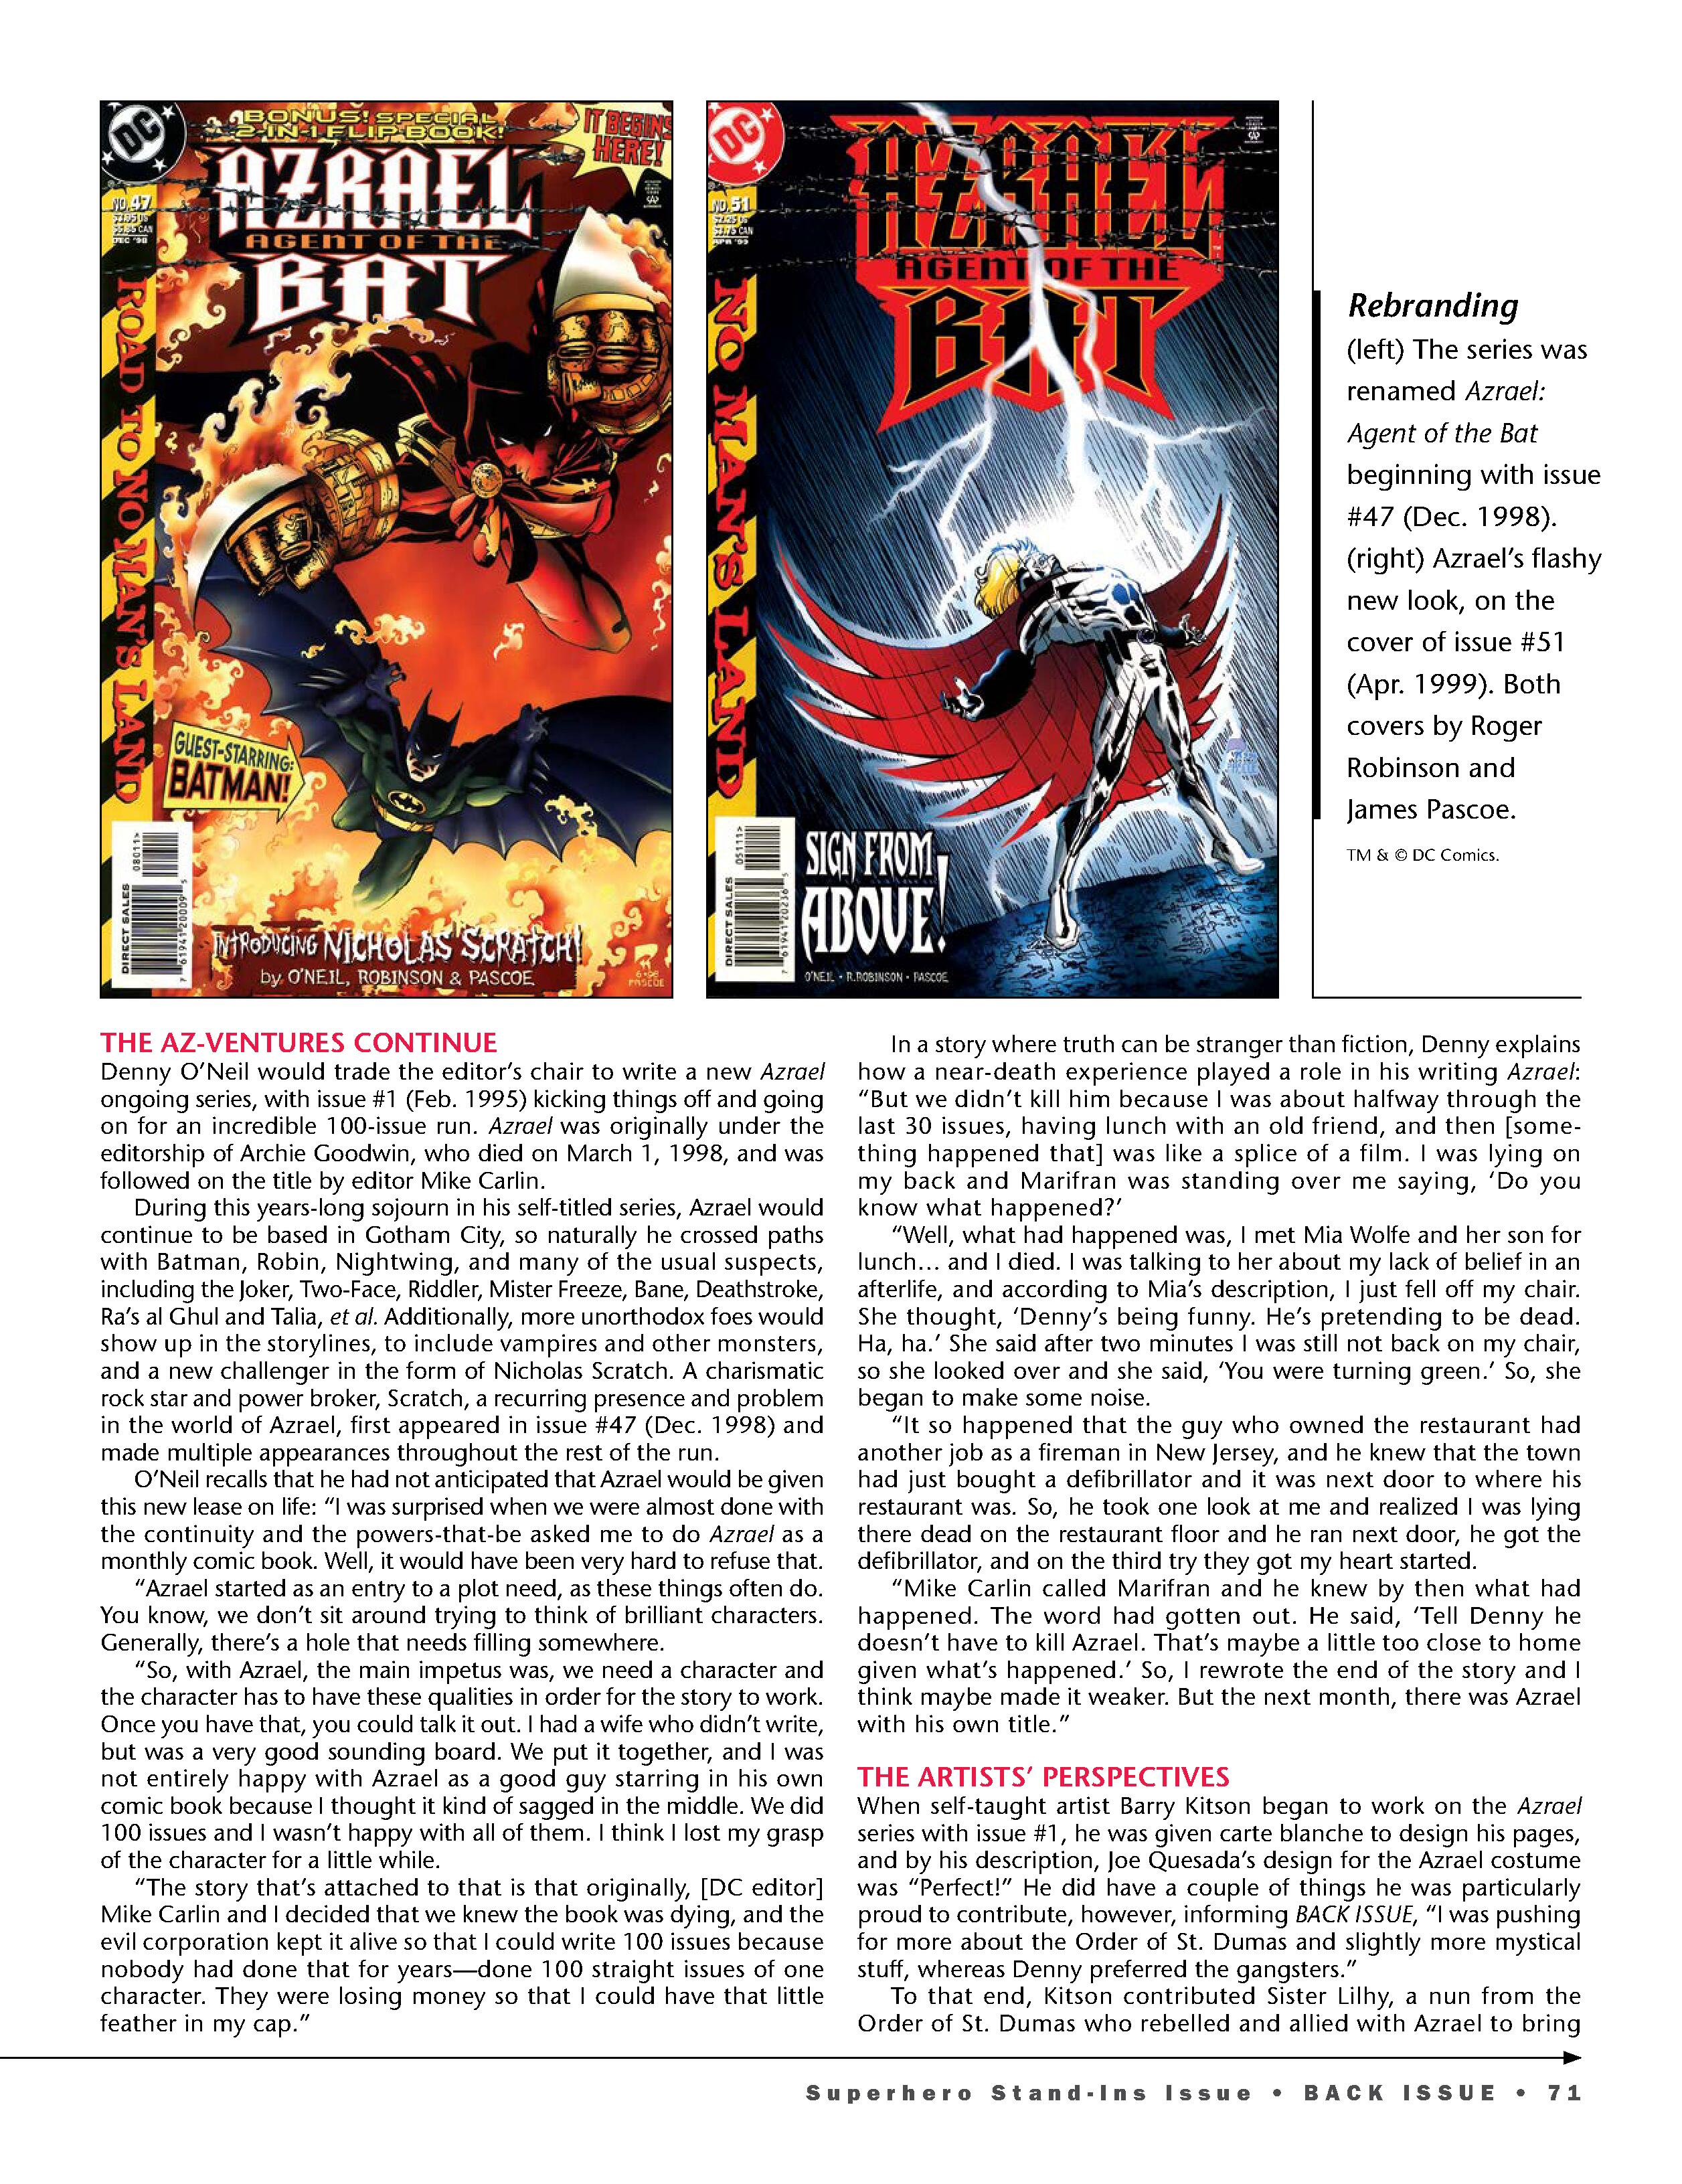 Read online Back Issue comic -  Issue #117 - 73